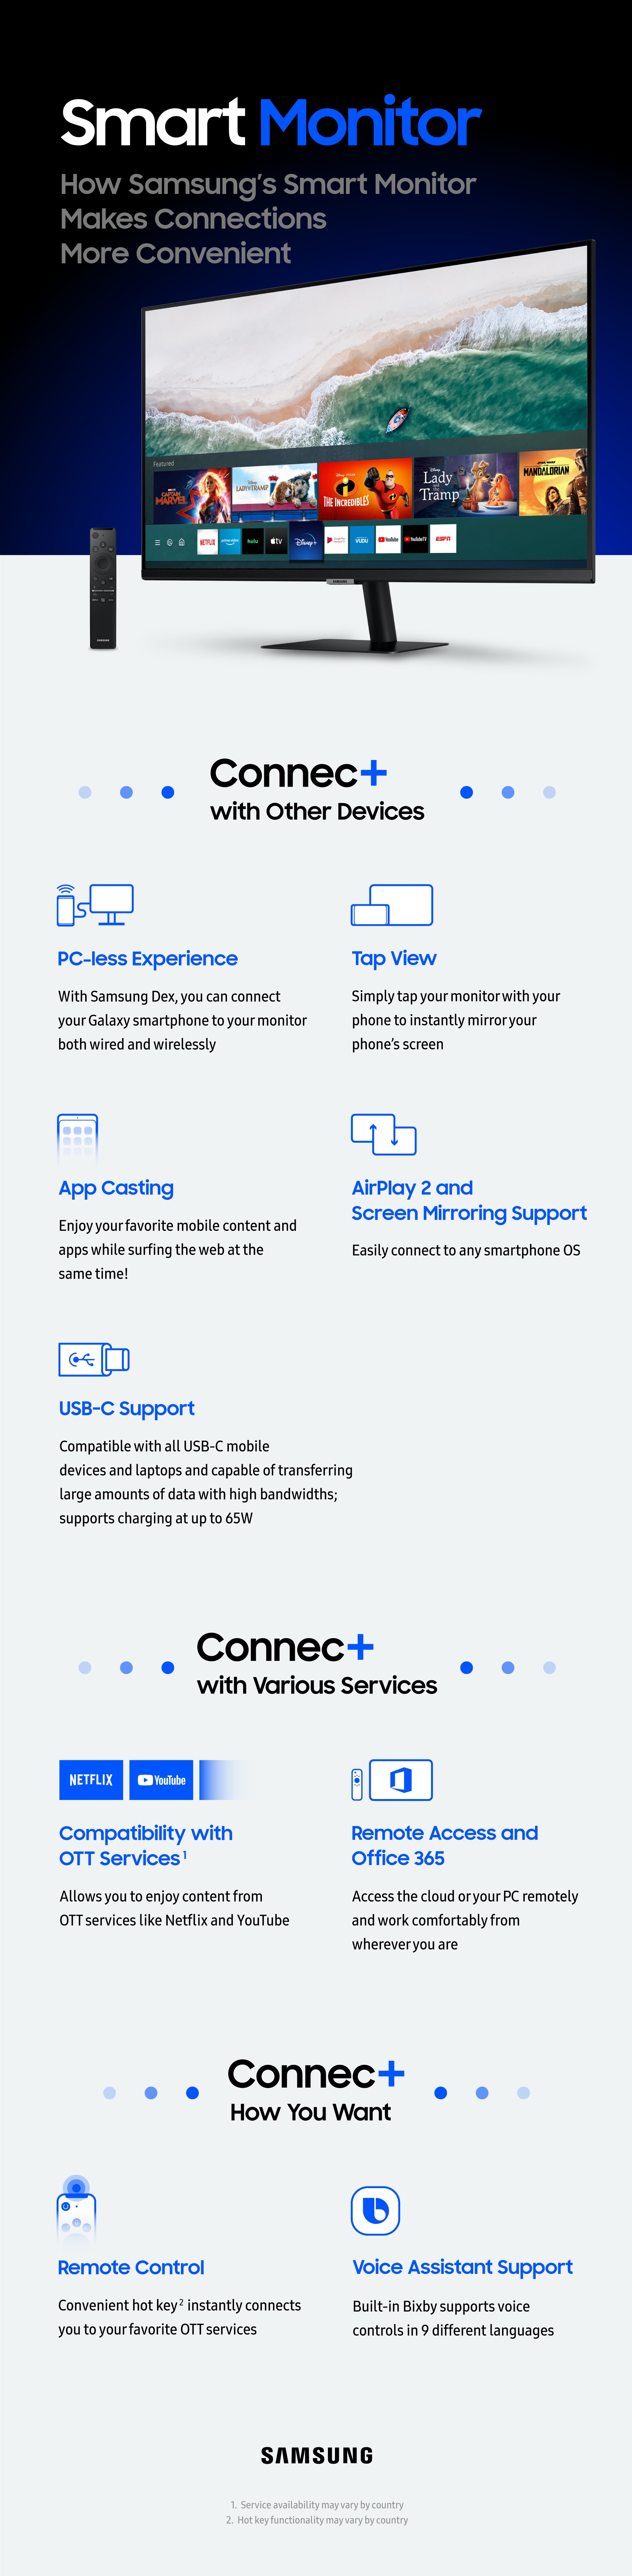 Samsung Smart Monitor M5 M7 Features Infographic